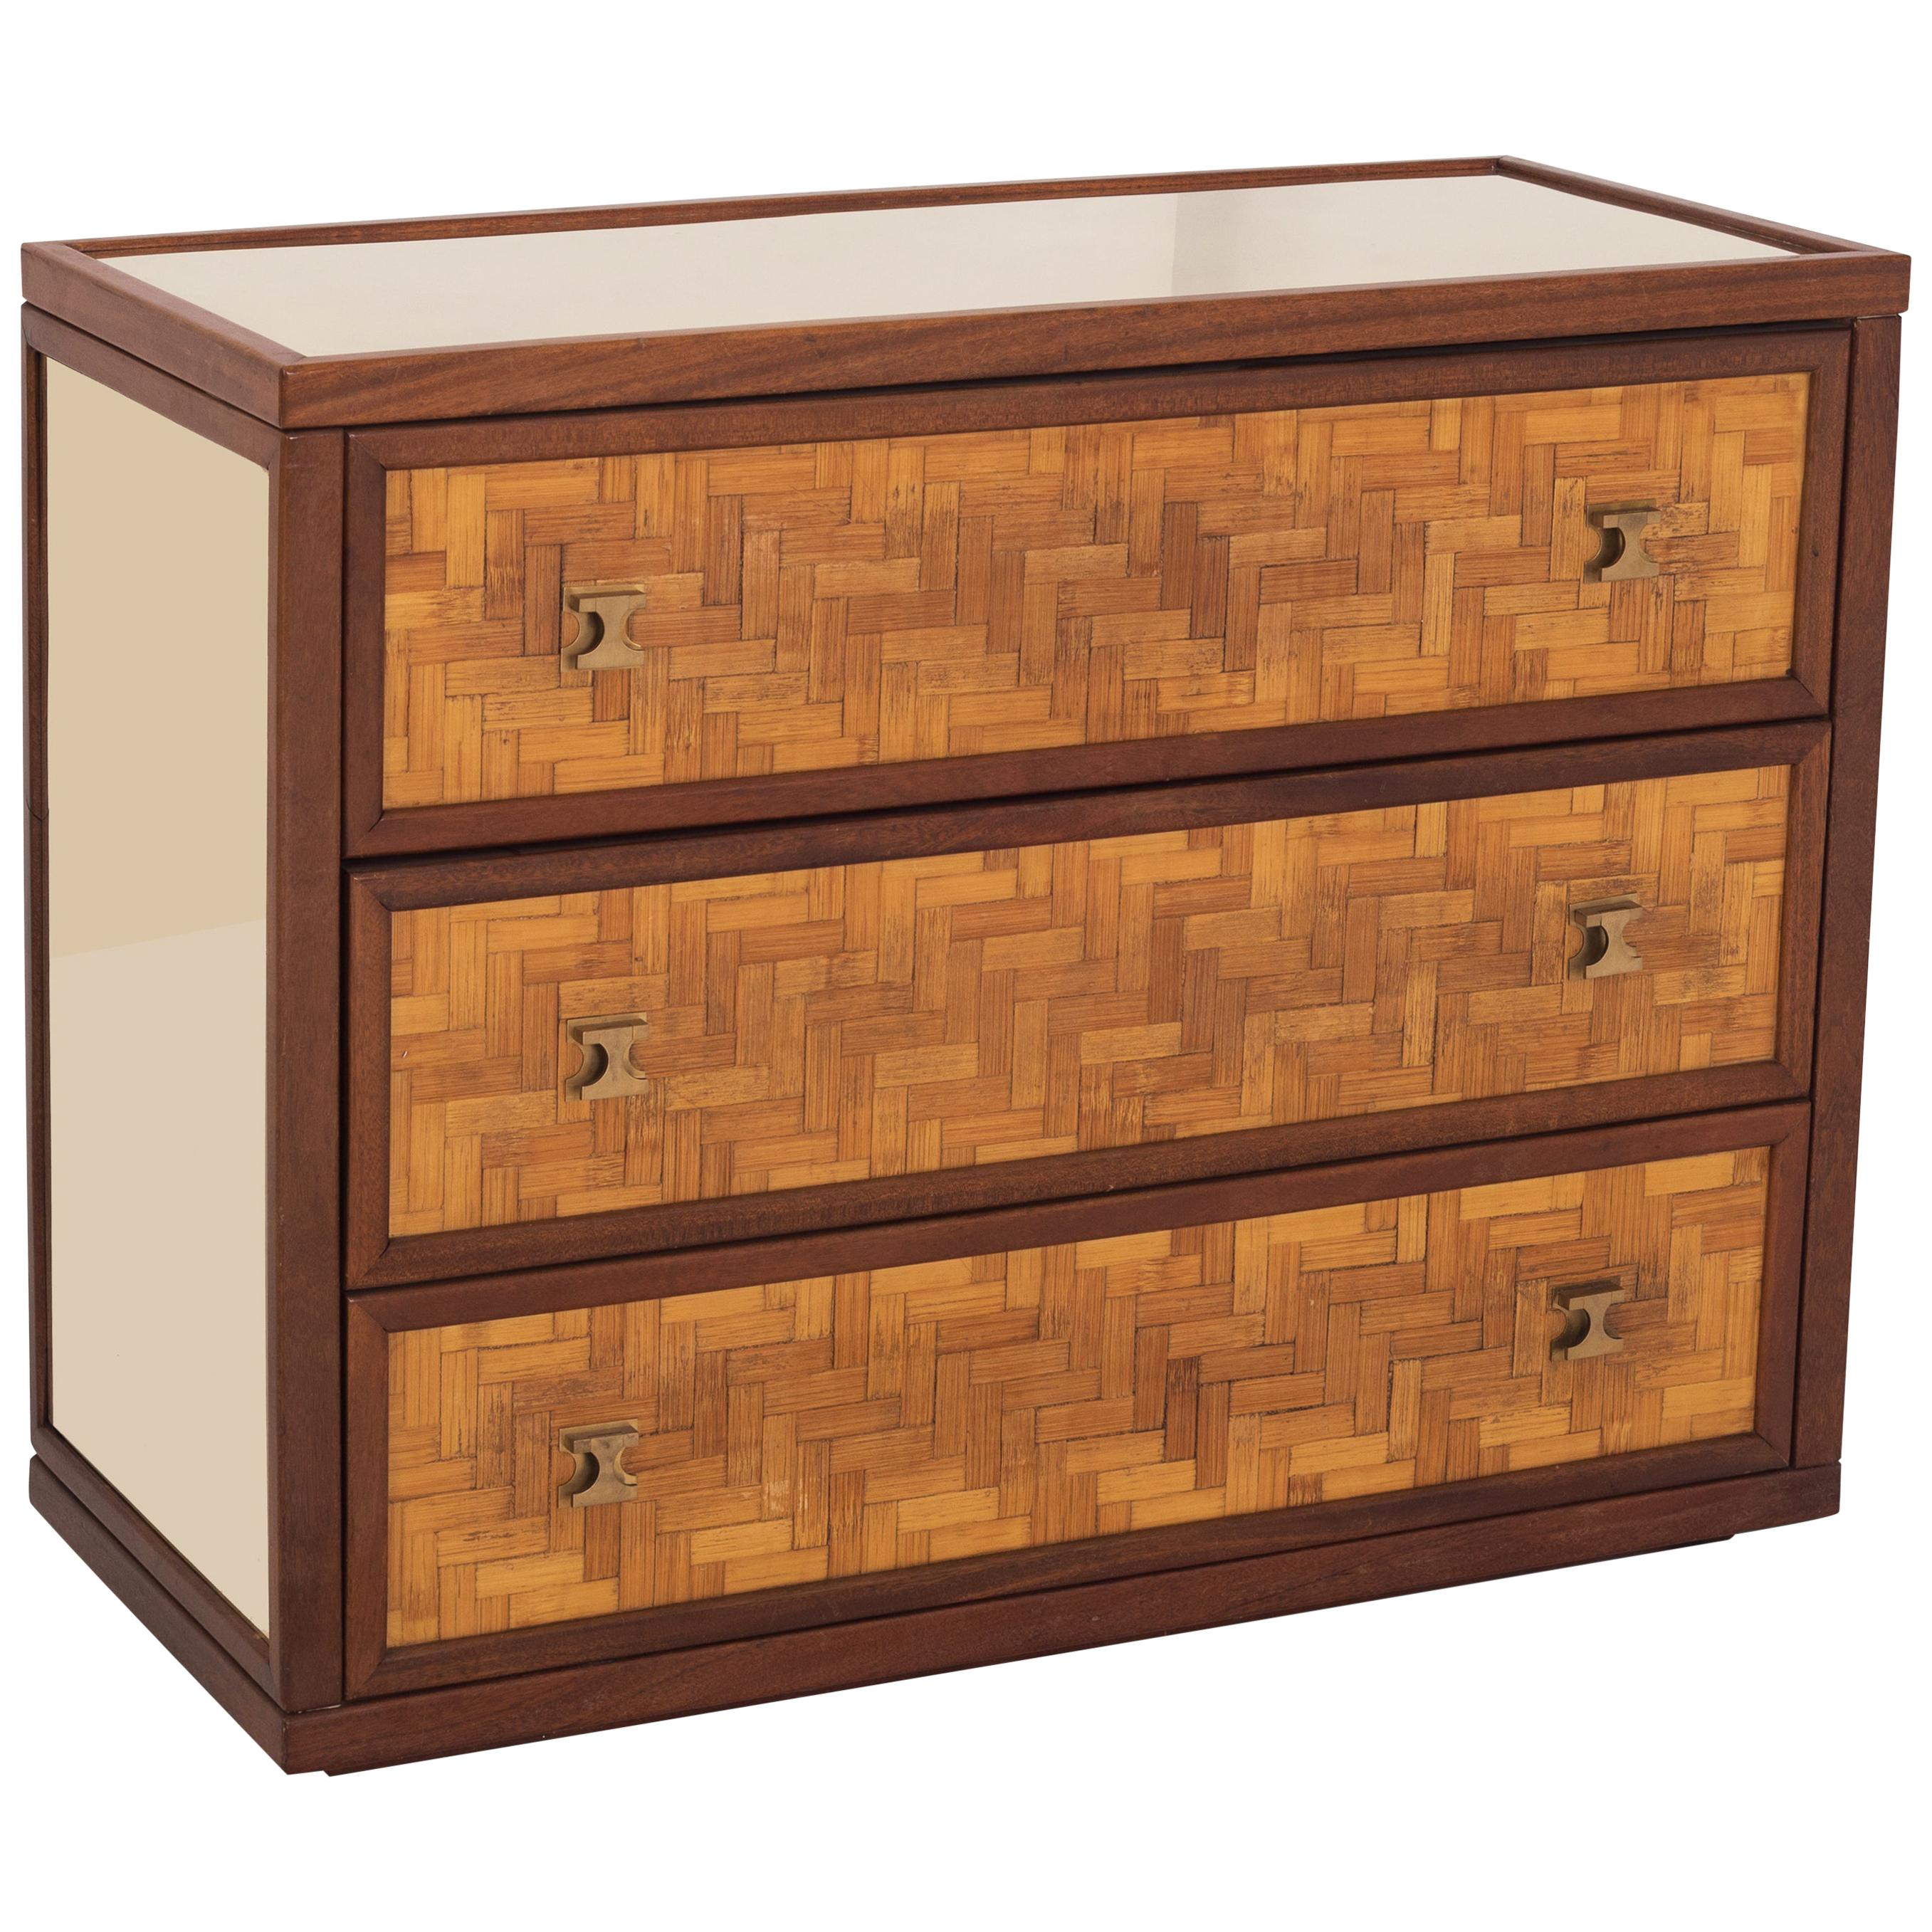 Bamboo and Walnut Drawer Chest Vivai del Sud